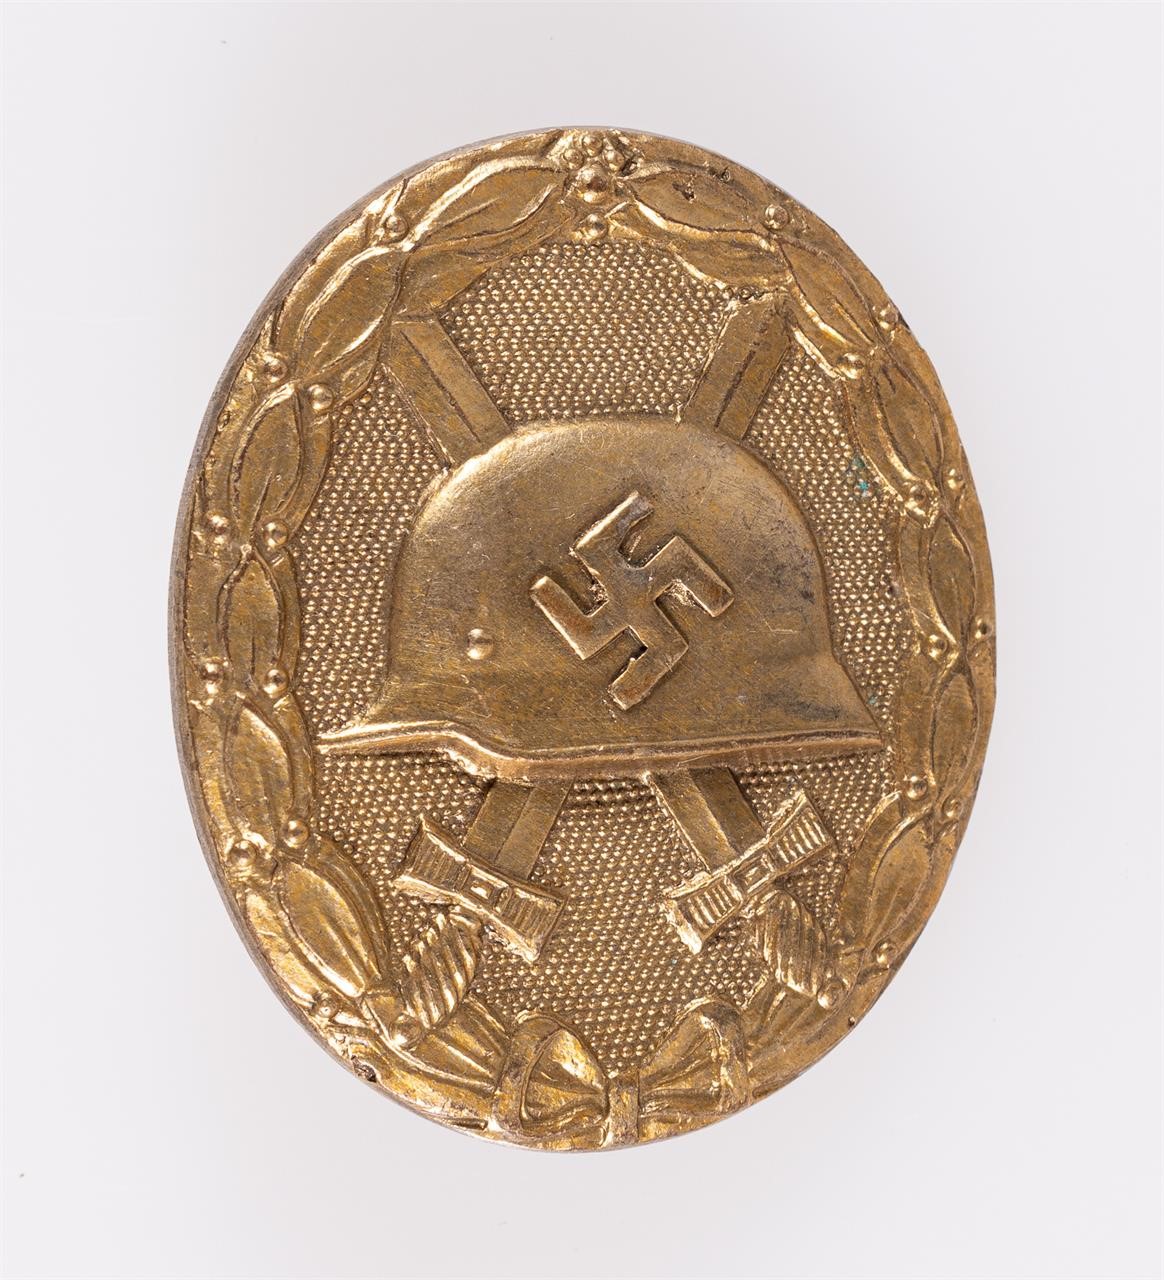 WWII GERMAN WOUND BADGE IN GOLD